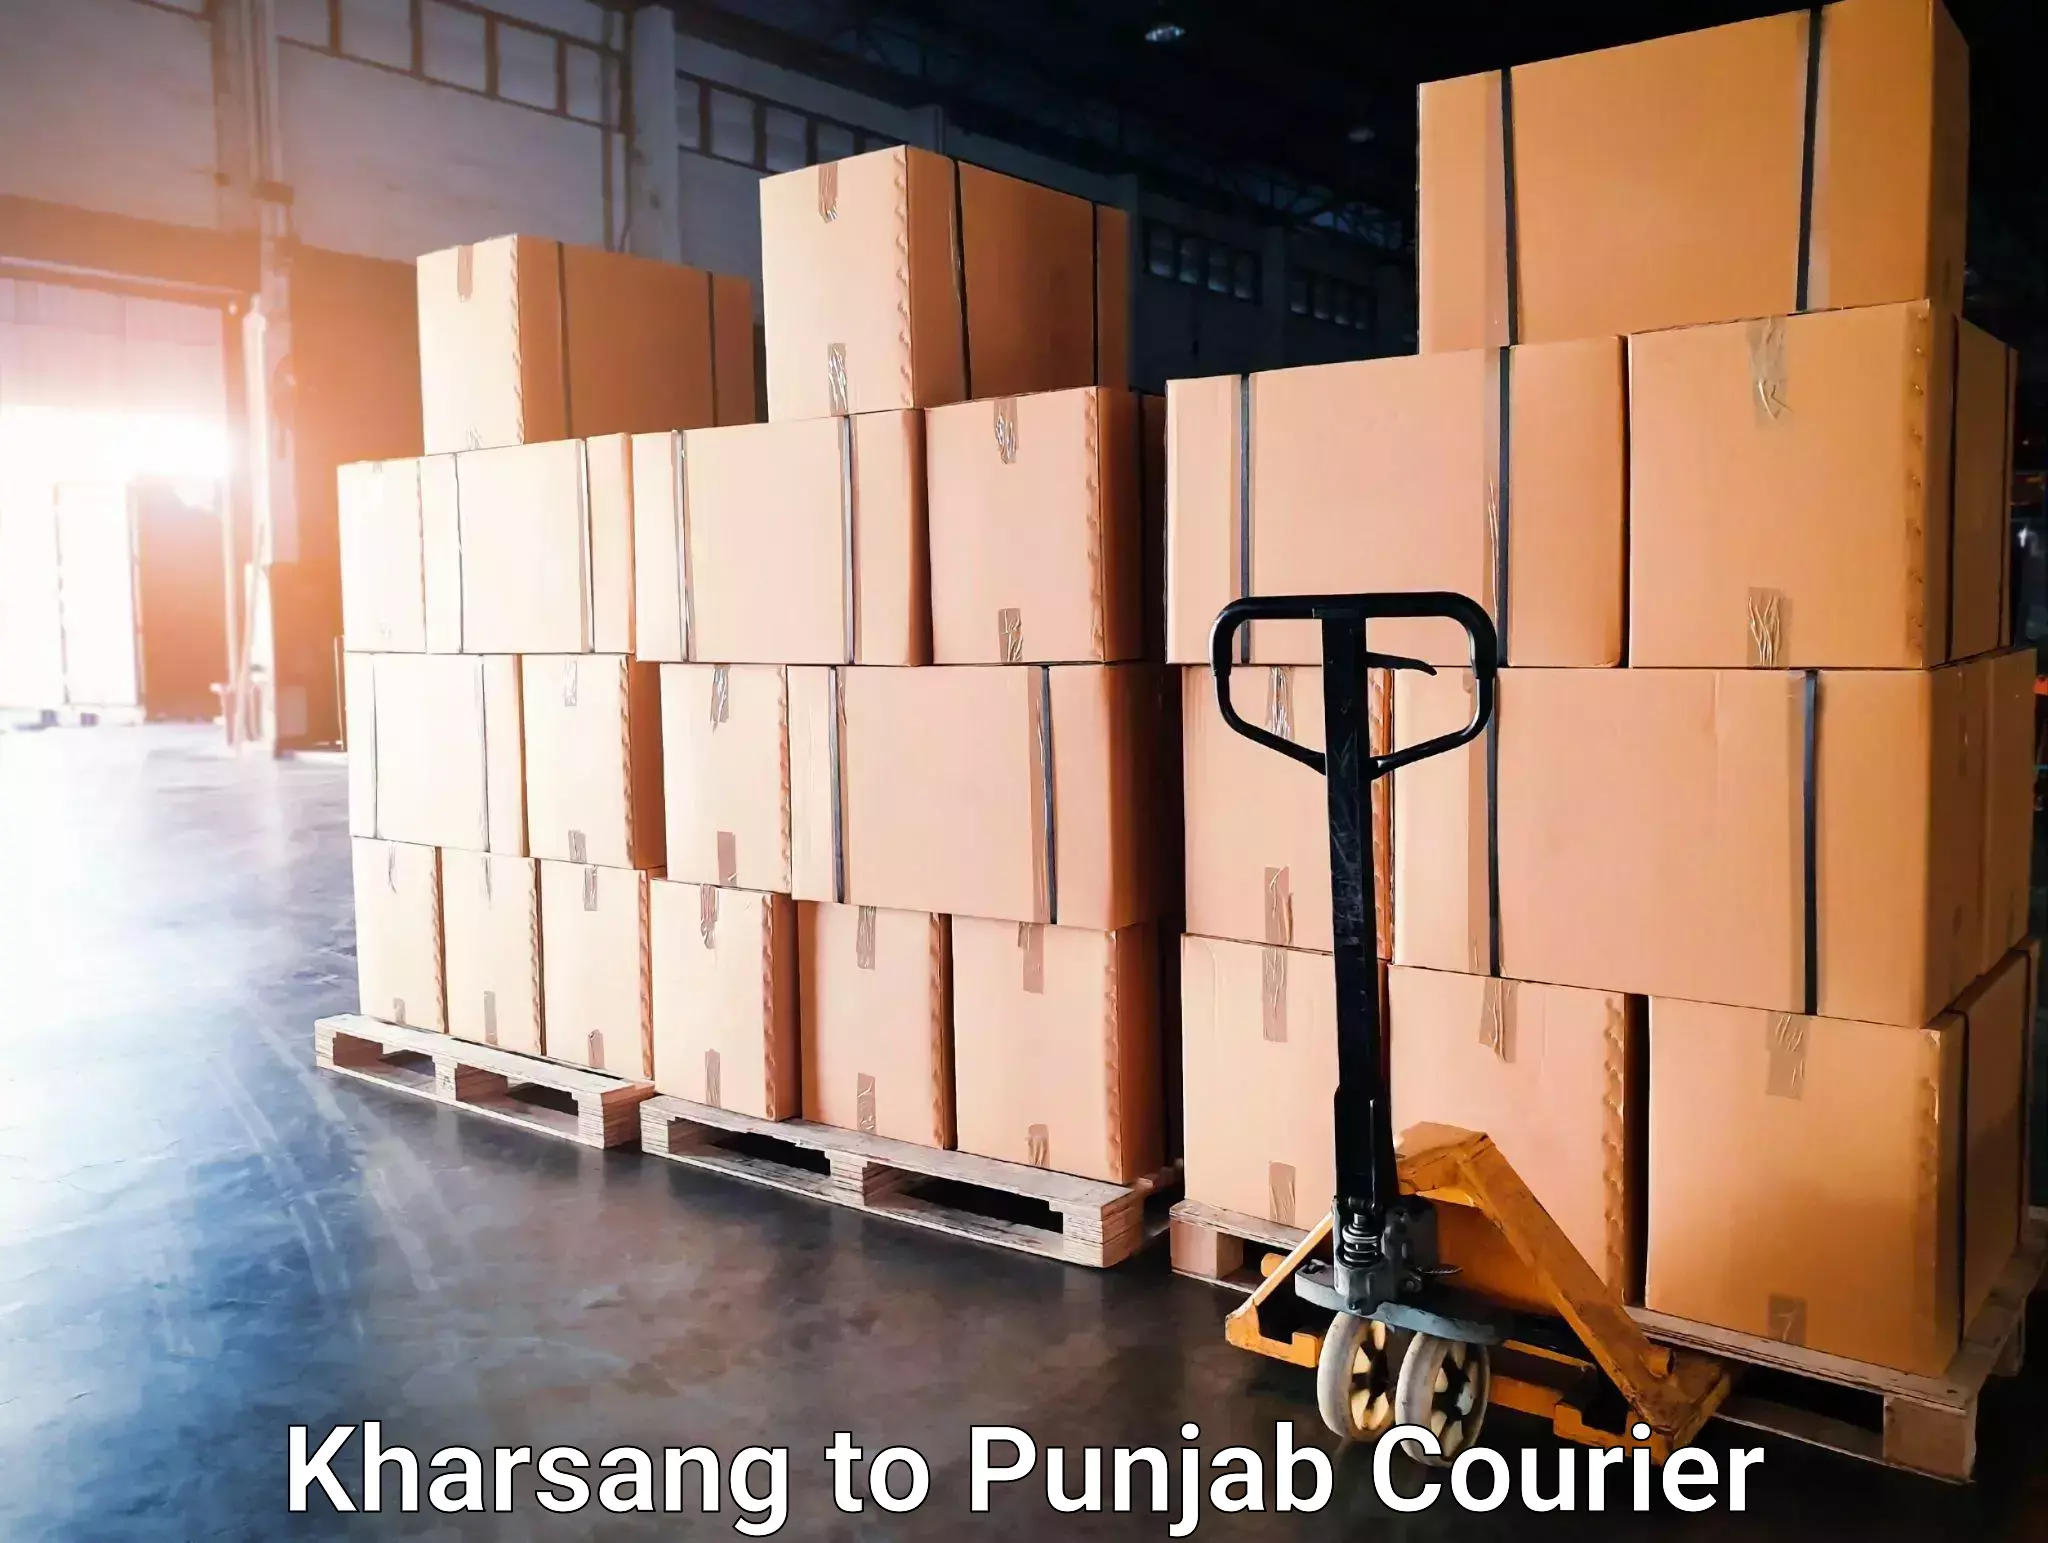 Speedy delivery service in Kharsang to Sangrur